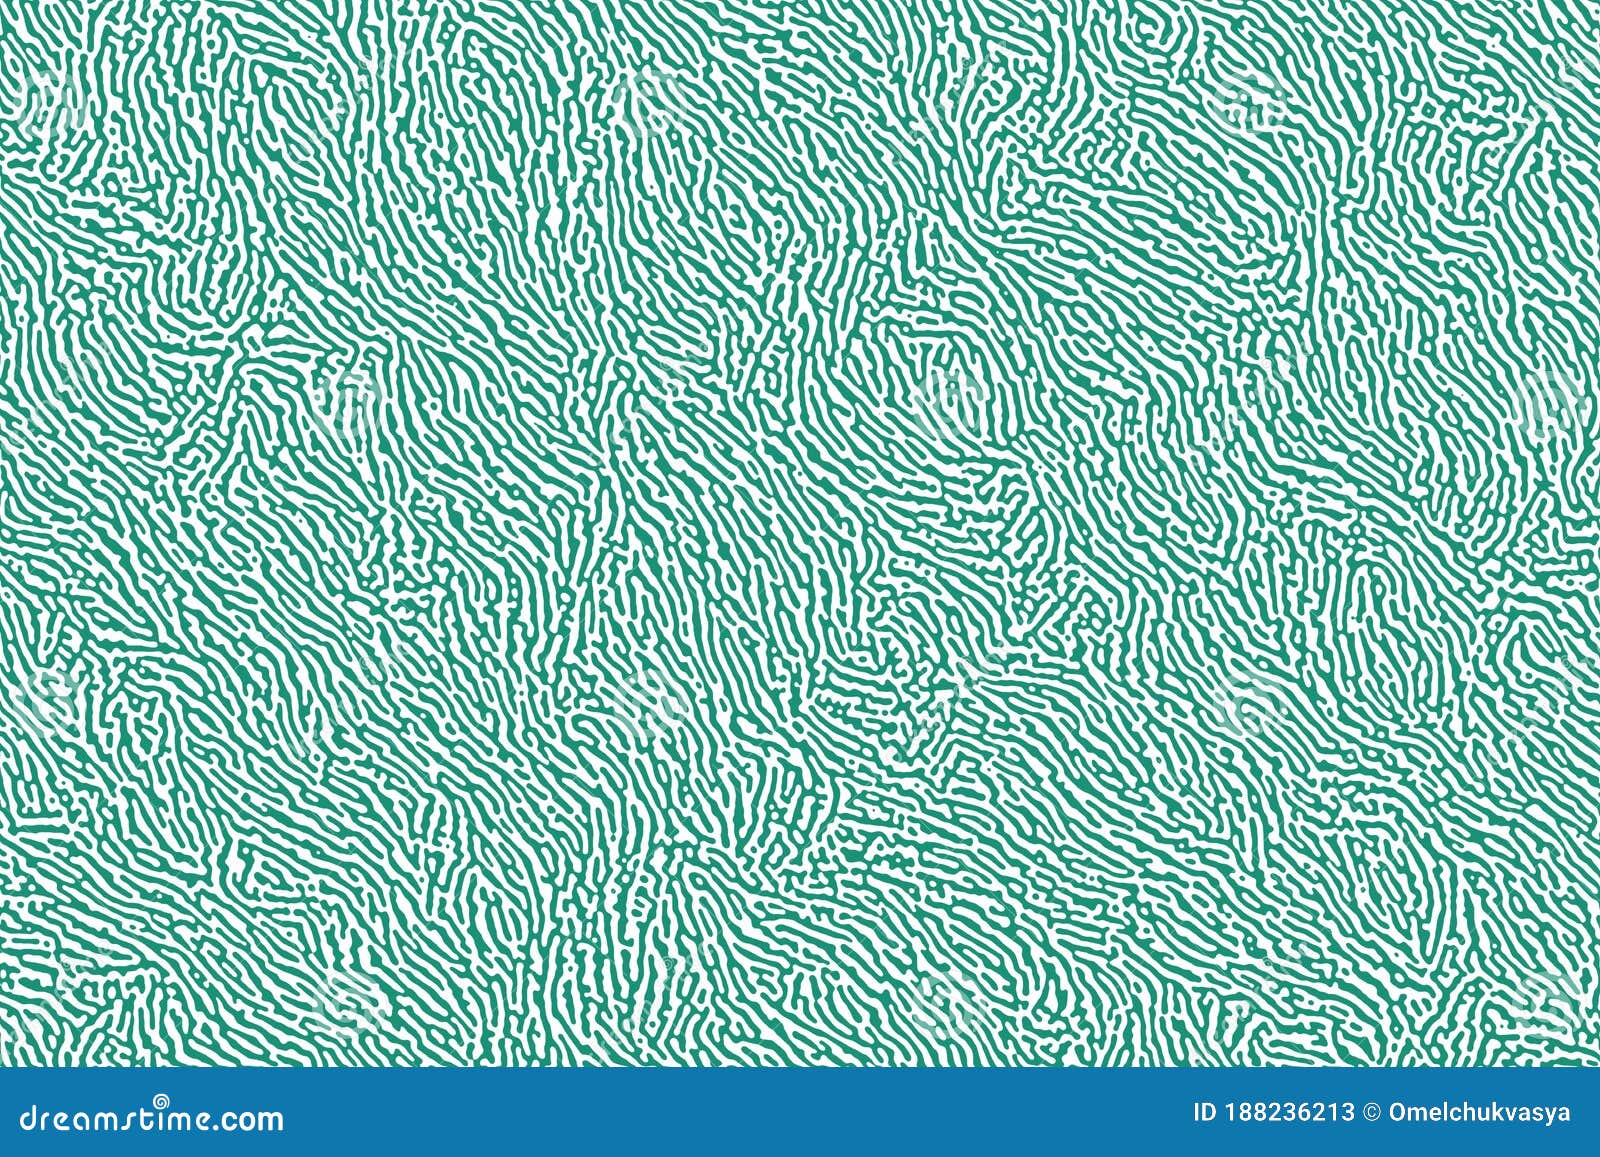 seamless turing pattern. texture background